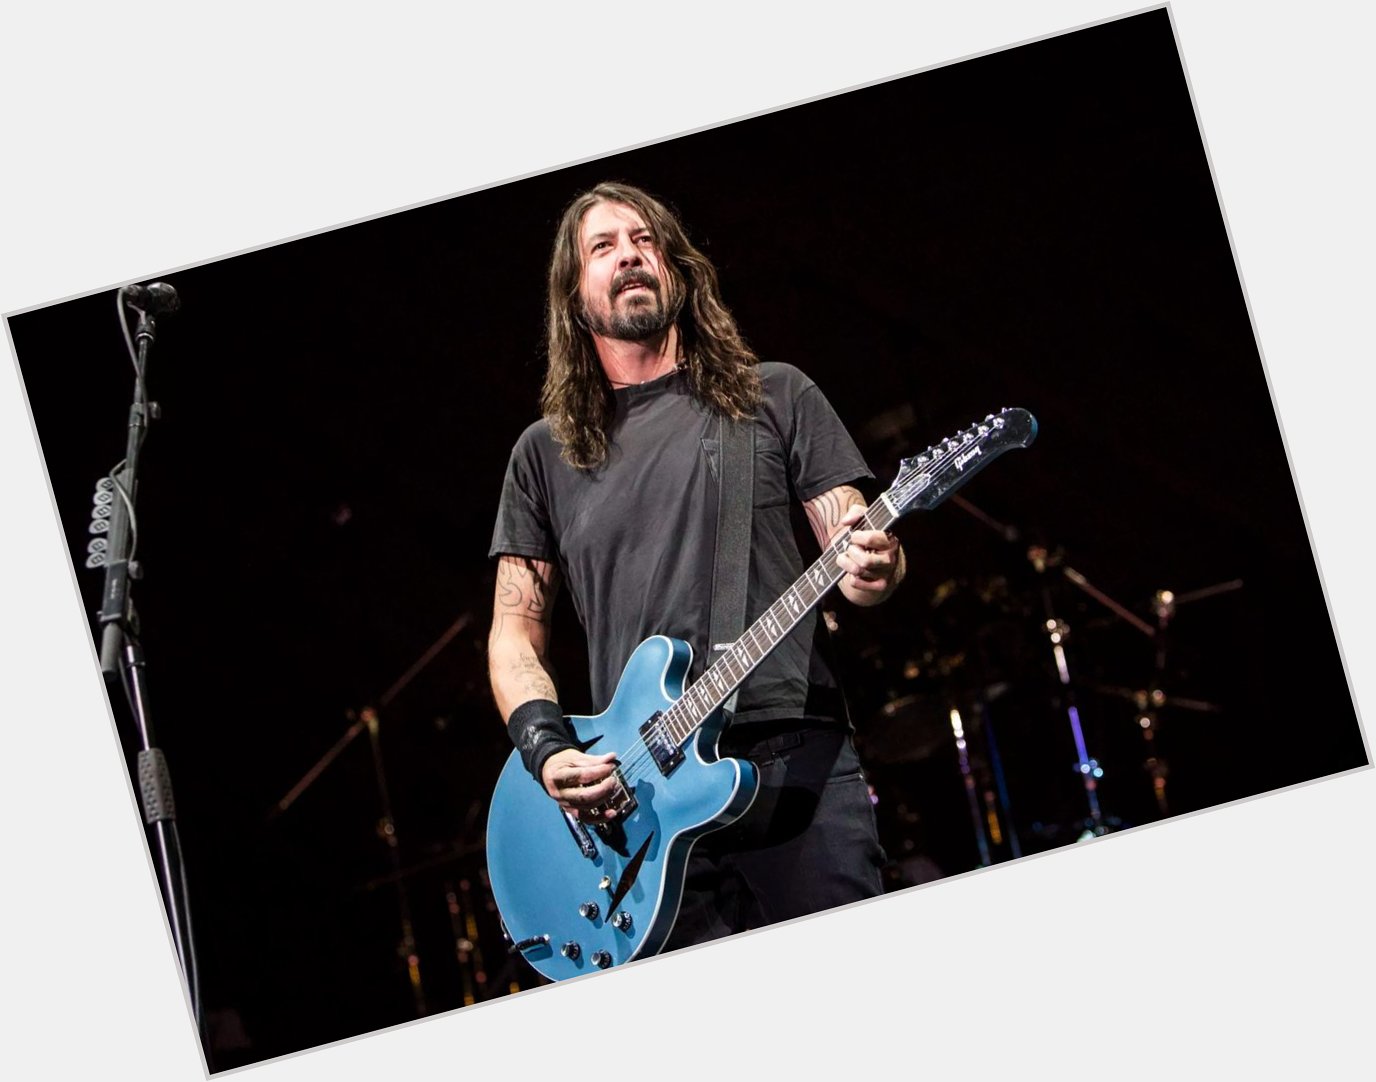 There goes my hero: A very happy birthday to Dave Grohl, who turns 54 years old today. 